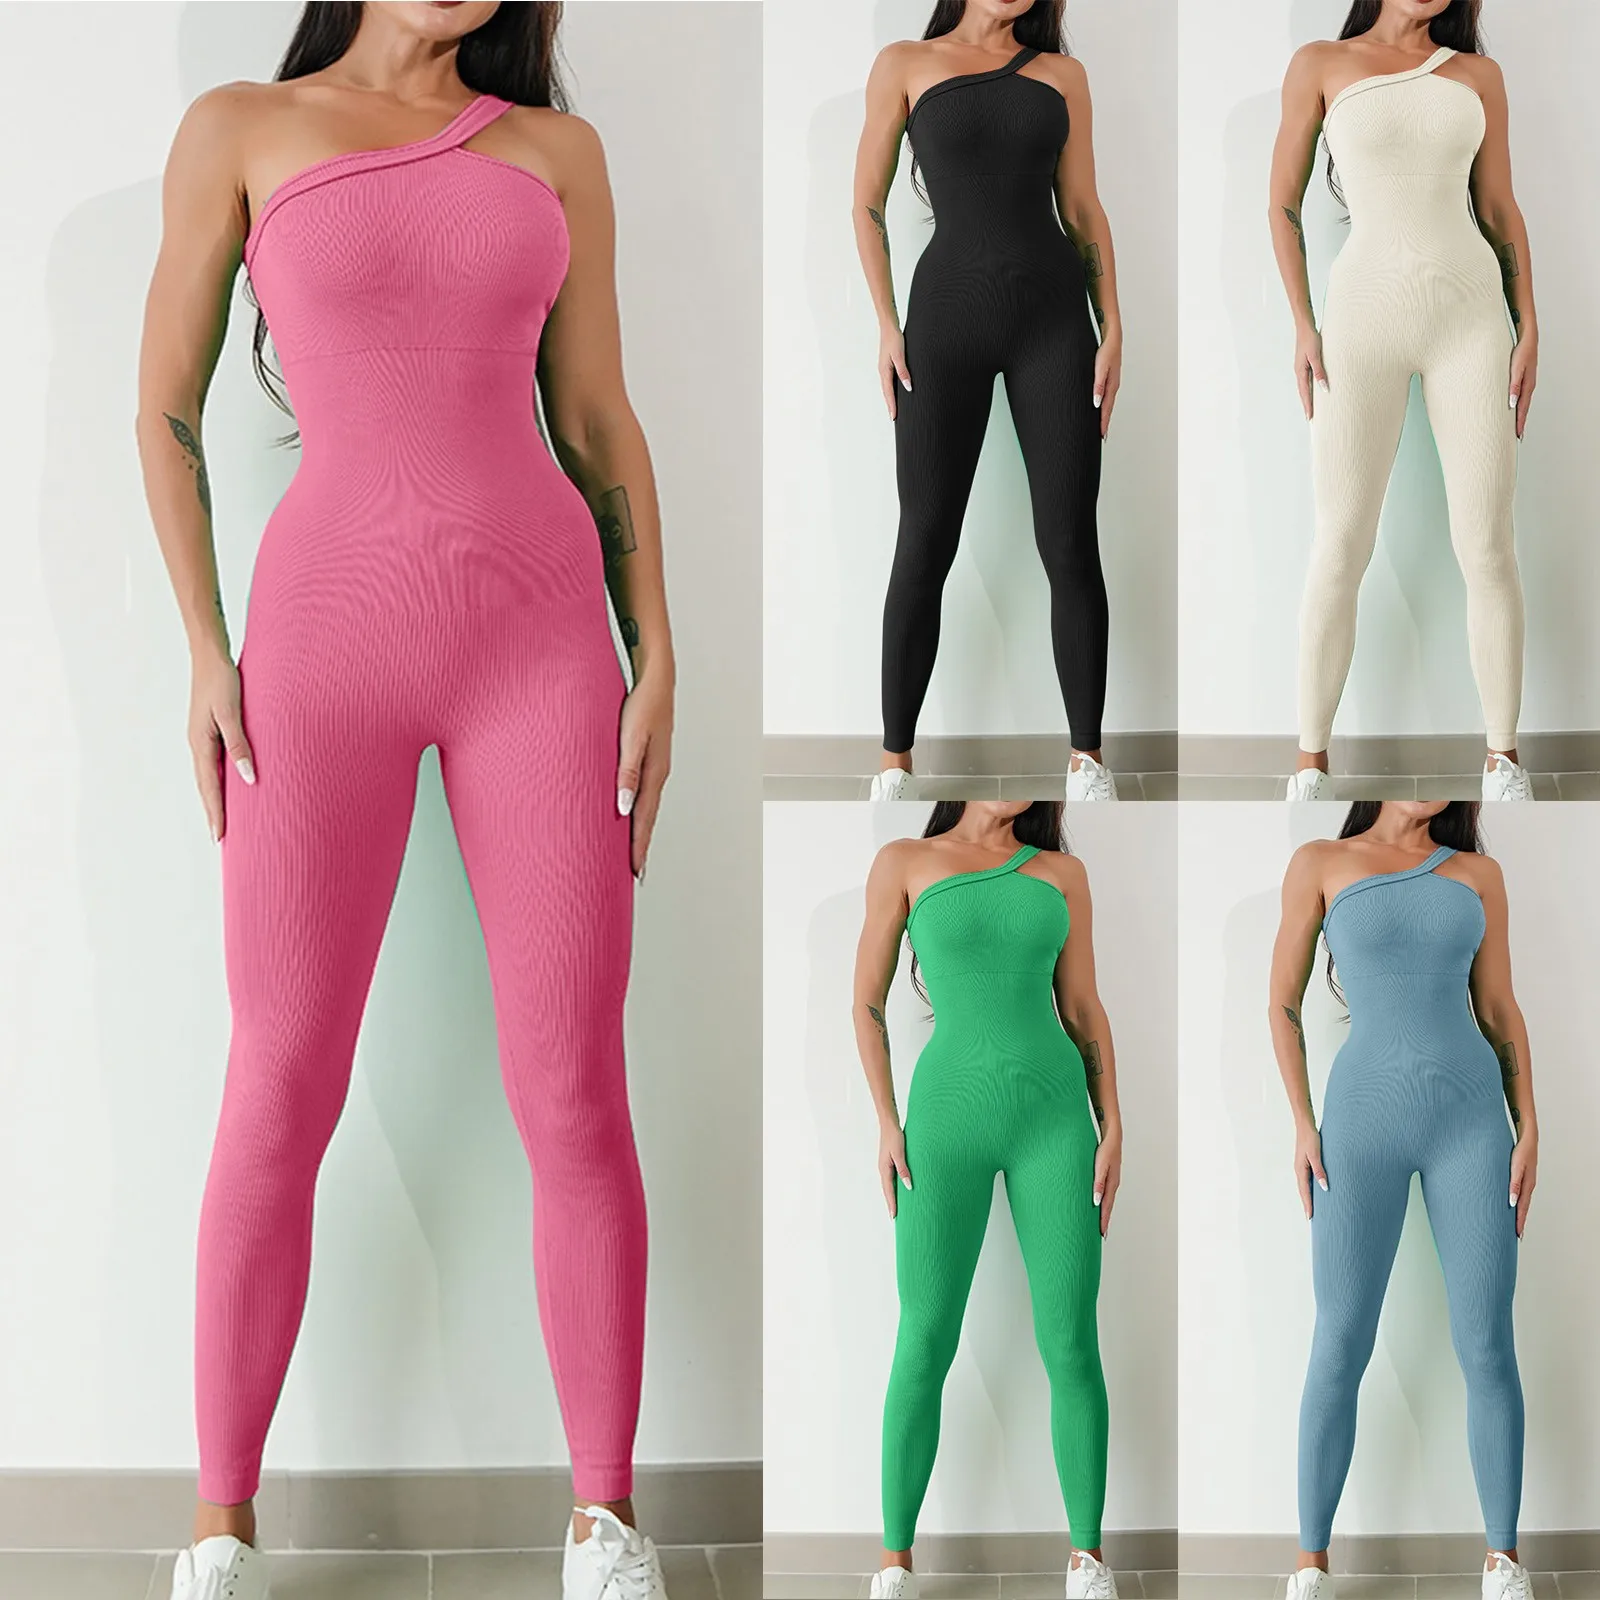 

New Casual Leggings Women Jumpsuits Playsuits Suspenders Sexy Ribbed Sleeveless Solid Color Sports Fitness Yoga Wear Bodysuits